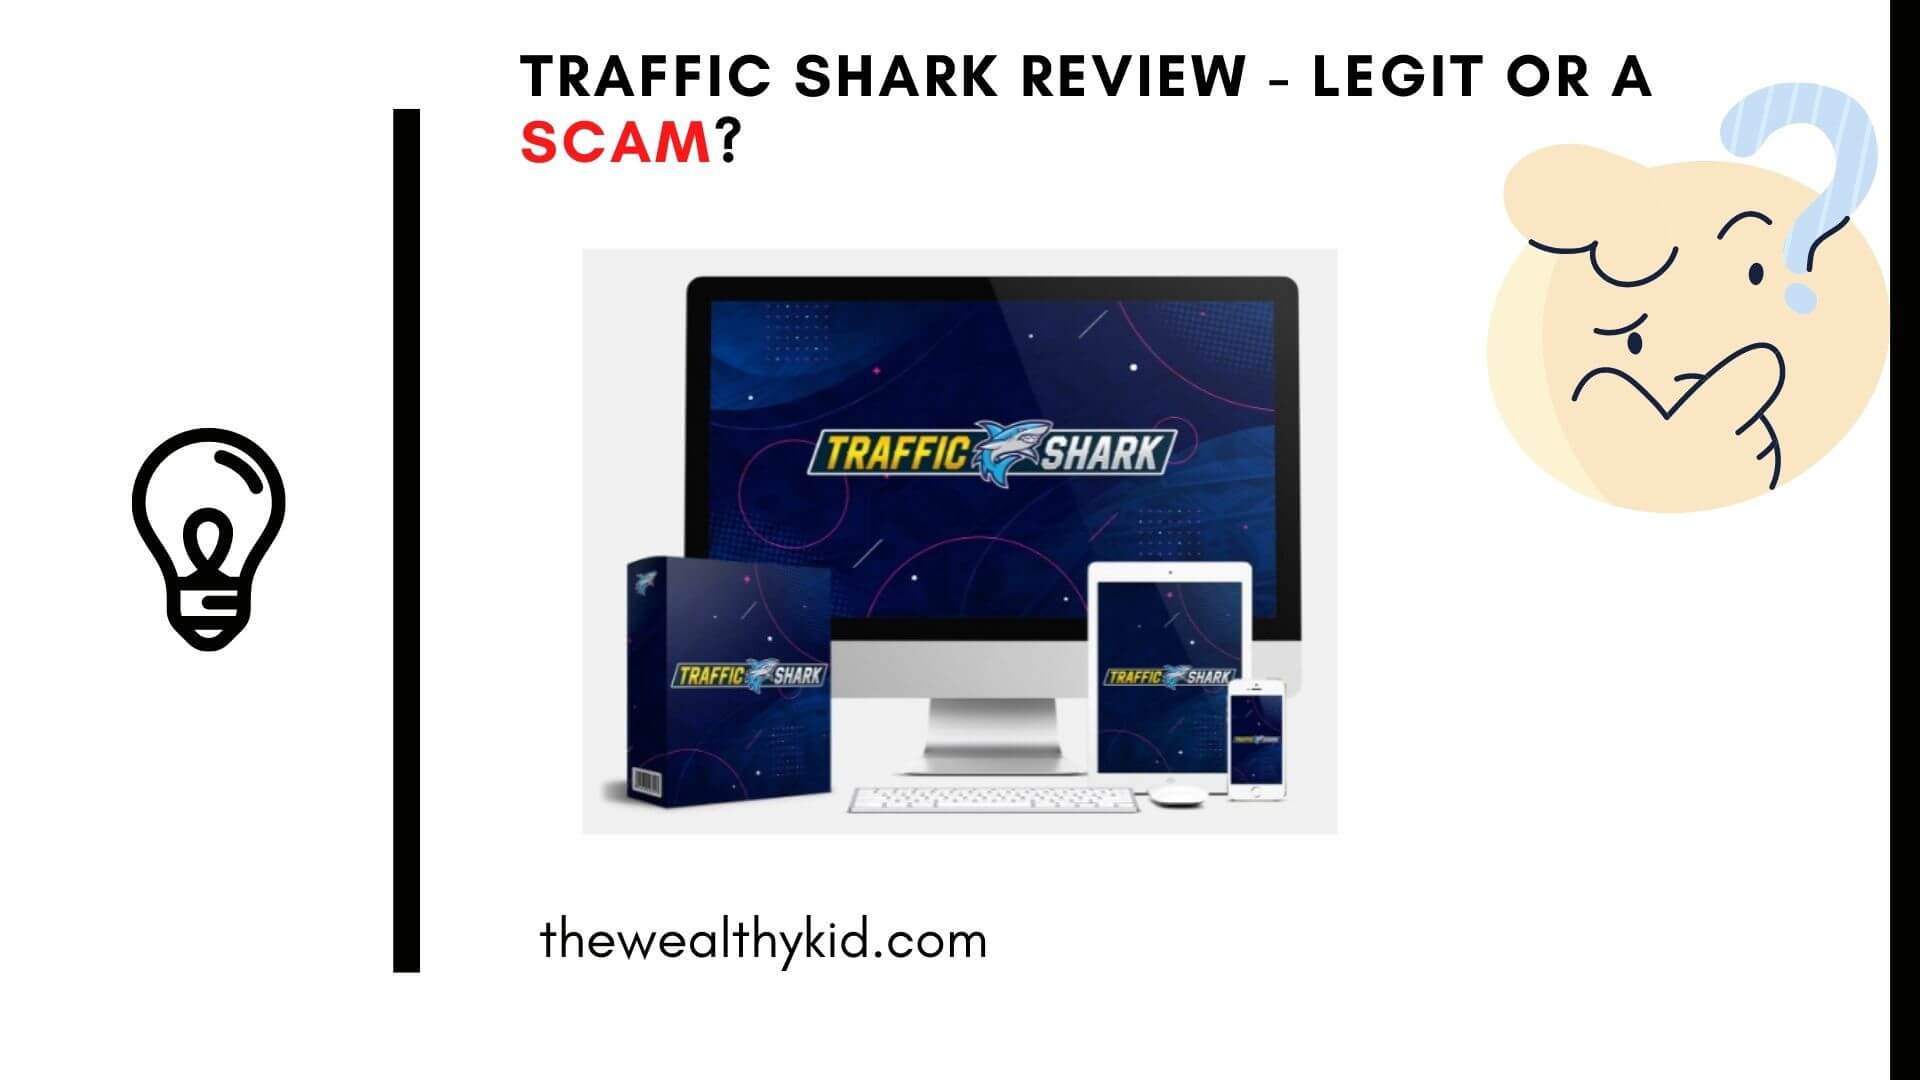 Traffic Shark Review - Featured Image